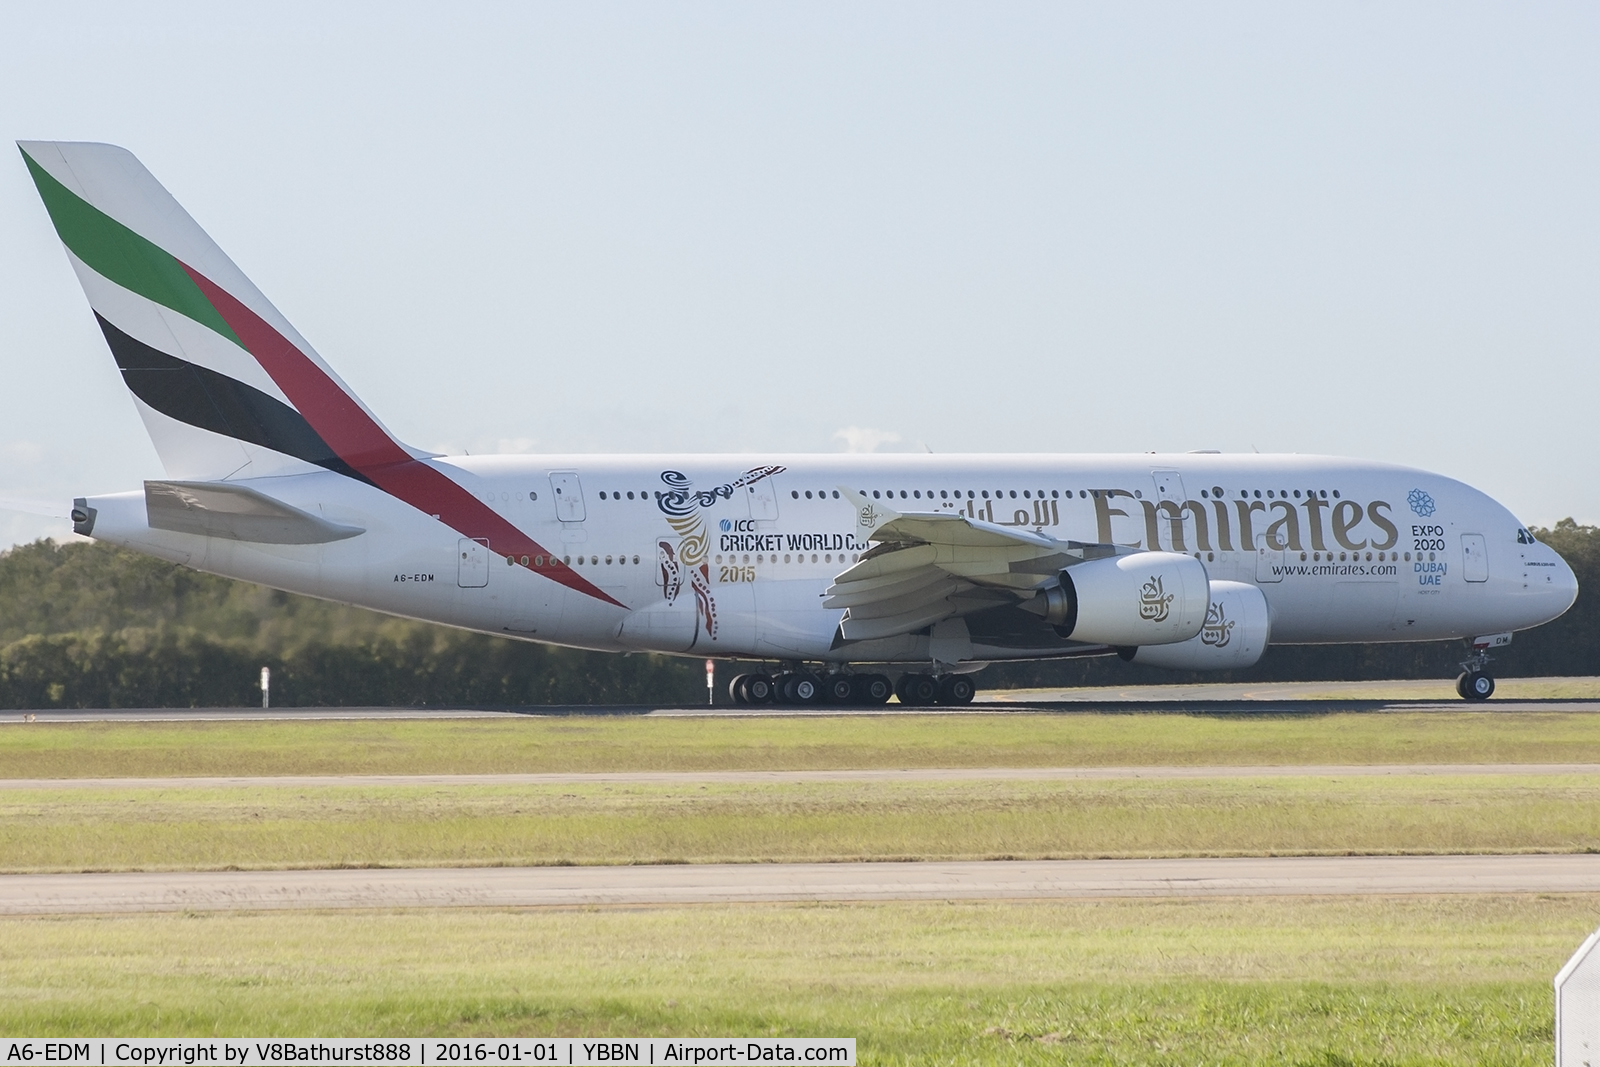 A6-EDM, 2010 Airbus A380-861 C/N 042, EDM wearing the ICC CWC 2015 livery